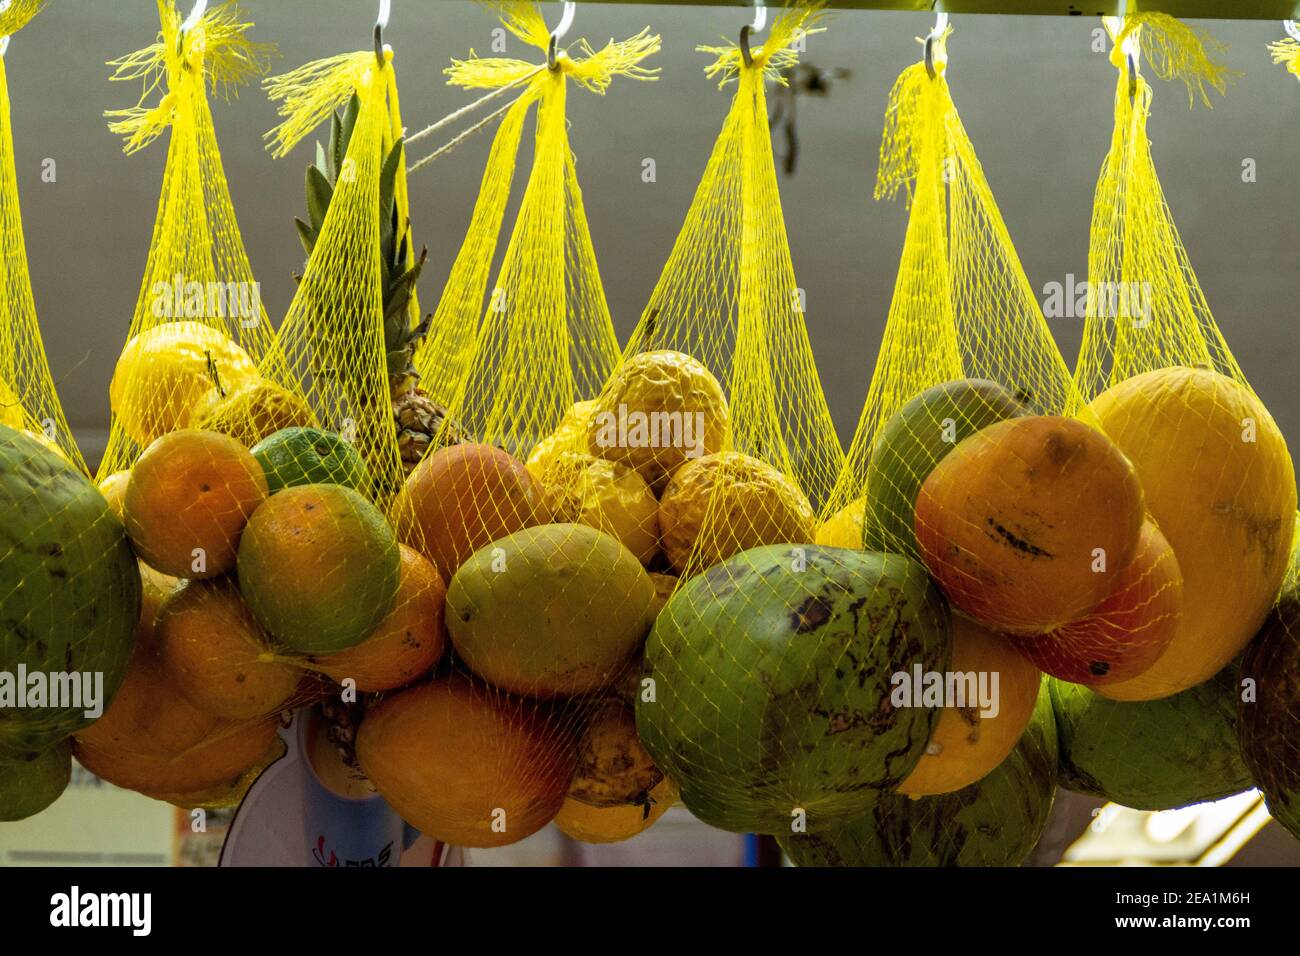 Hanging baskets of a mix of Brazilian fruits for making fresh fruit juices at one of the many soft drink bars in Sao Paulo, Brazil Stock Photo